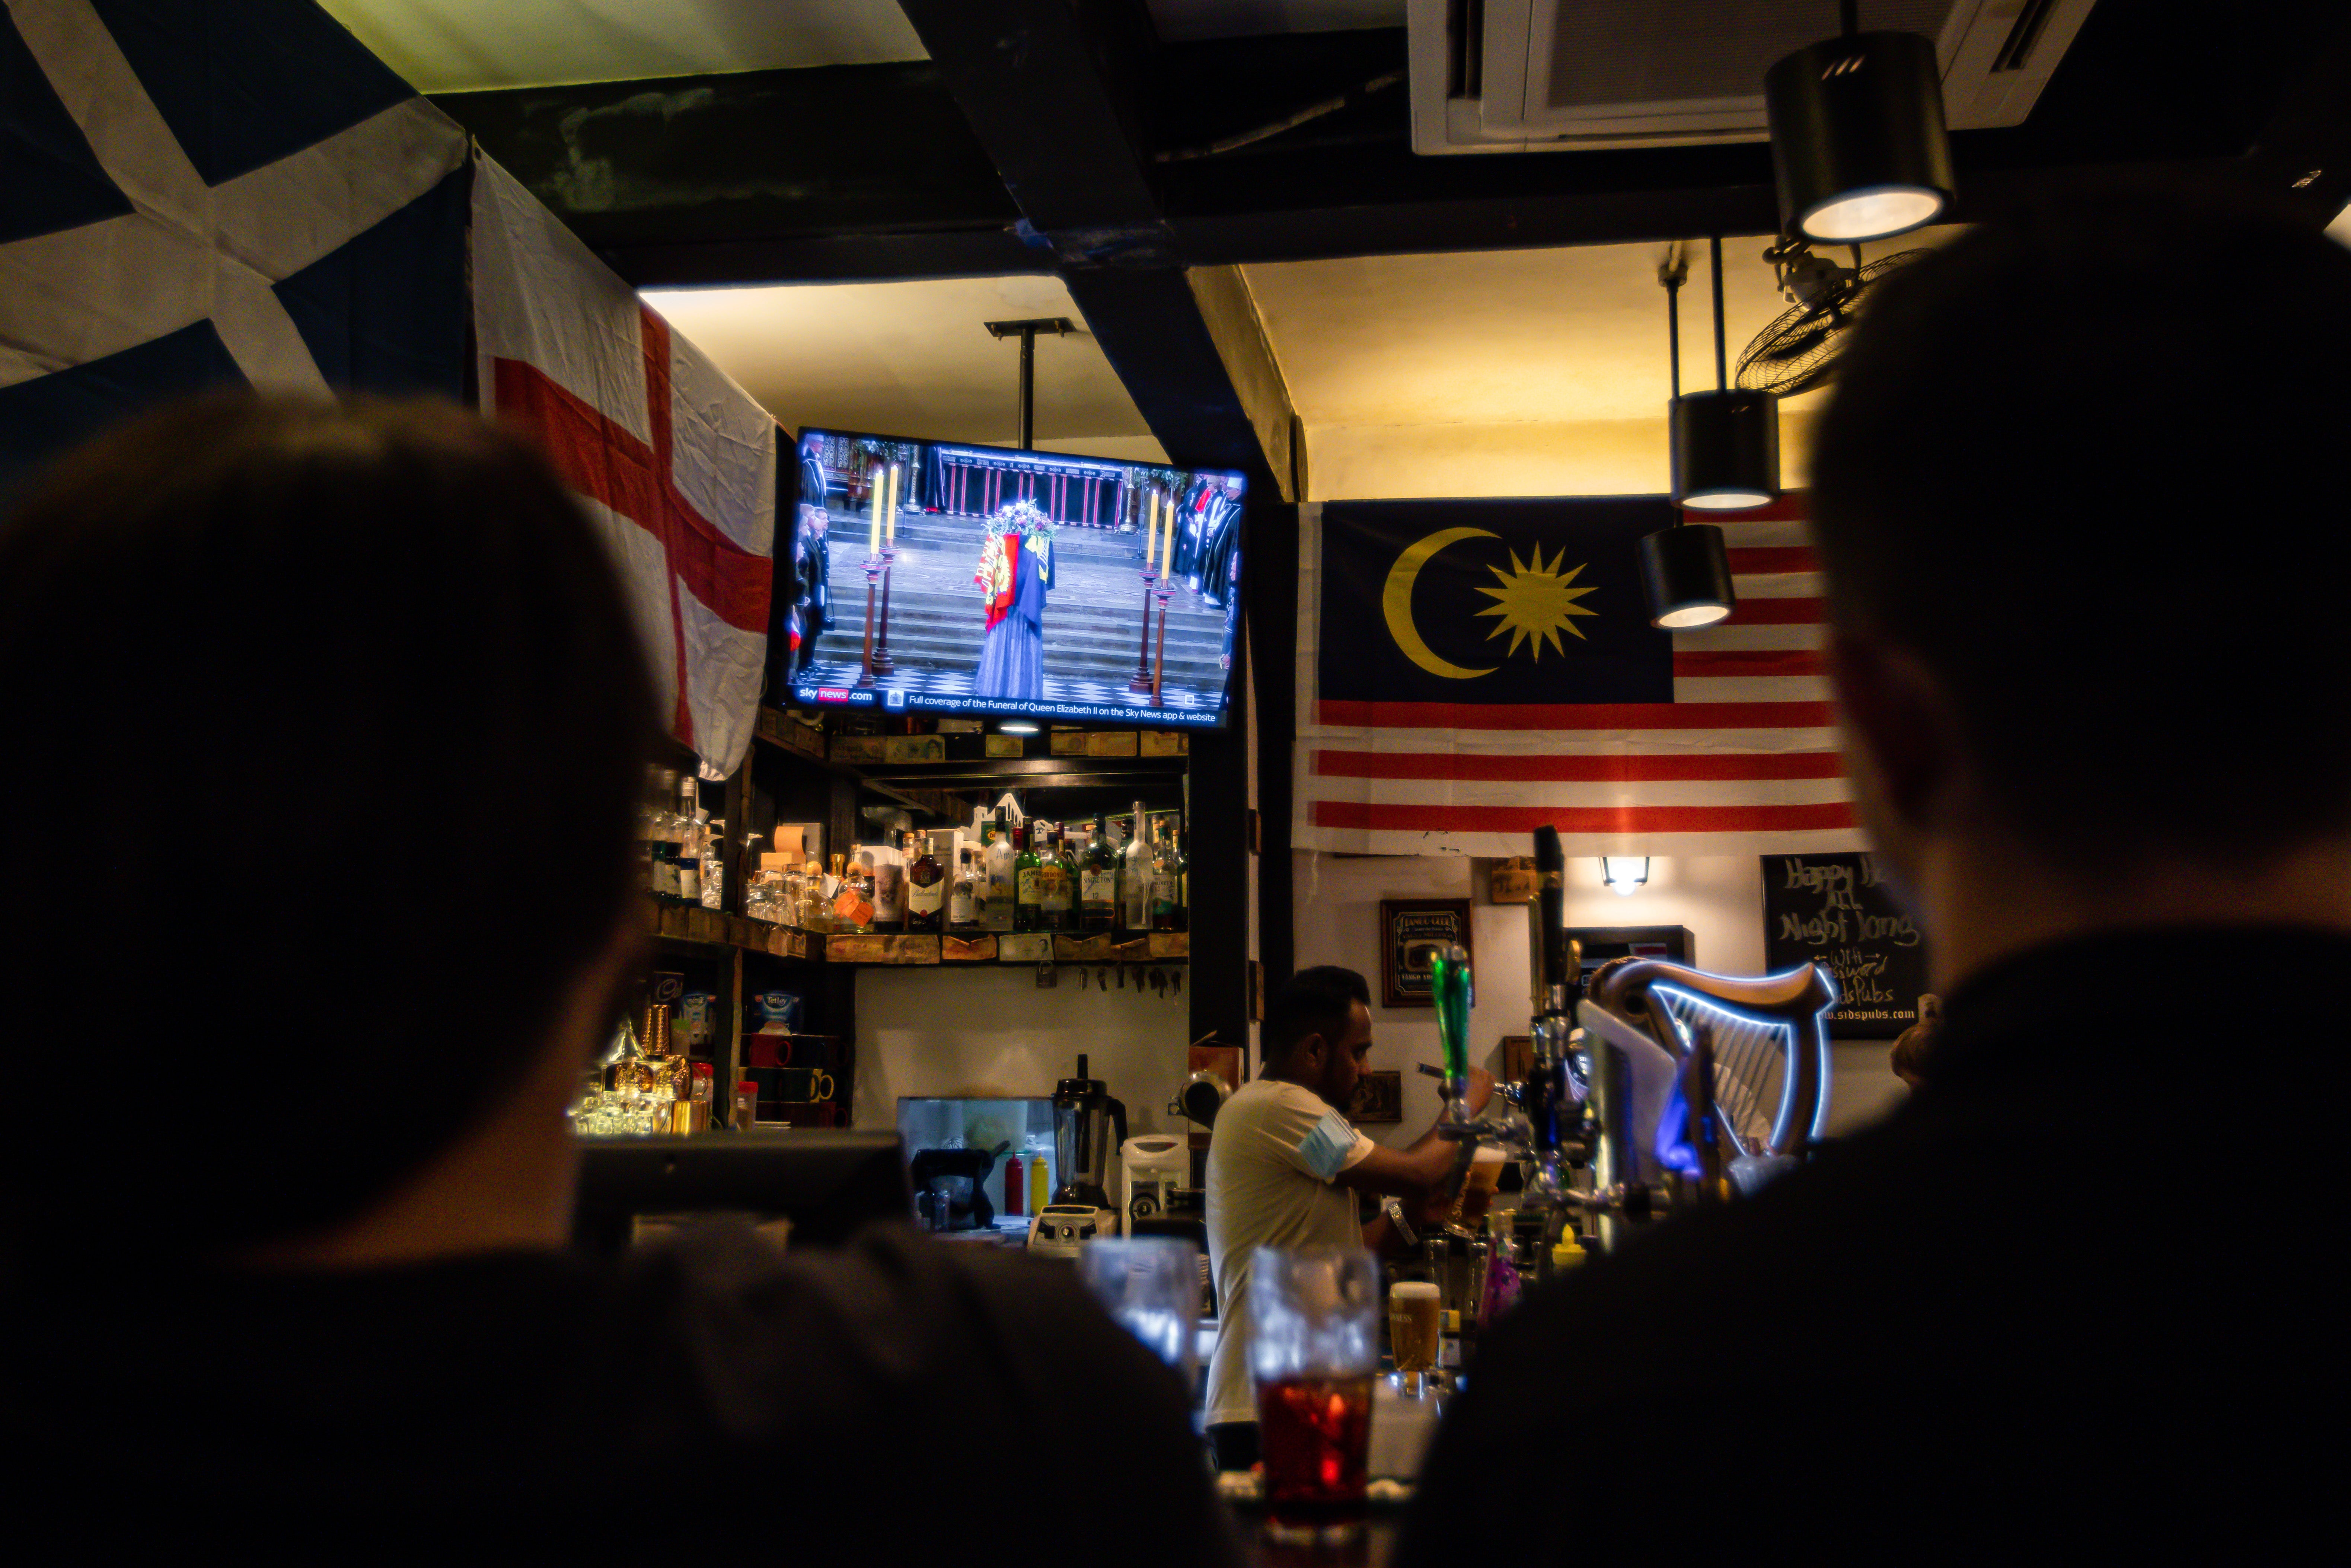 Foottage of the funeral being broadcast at a British pub in Kuala Lumpur, Malaysia